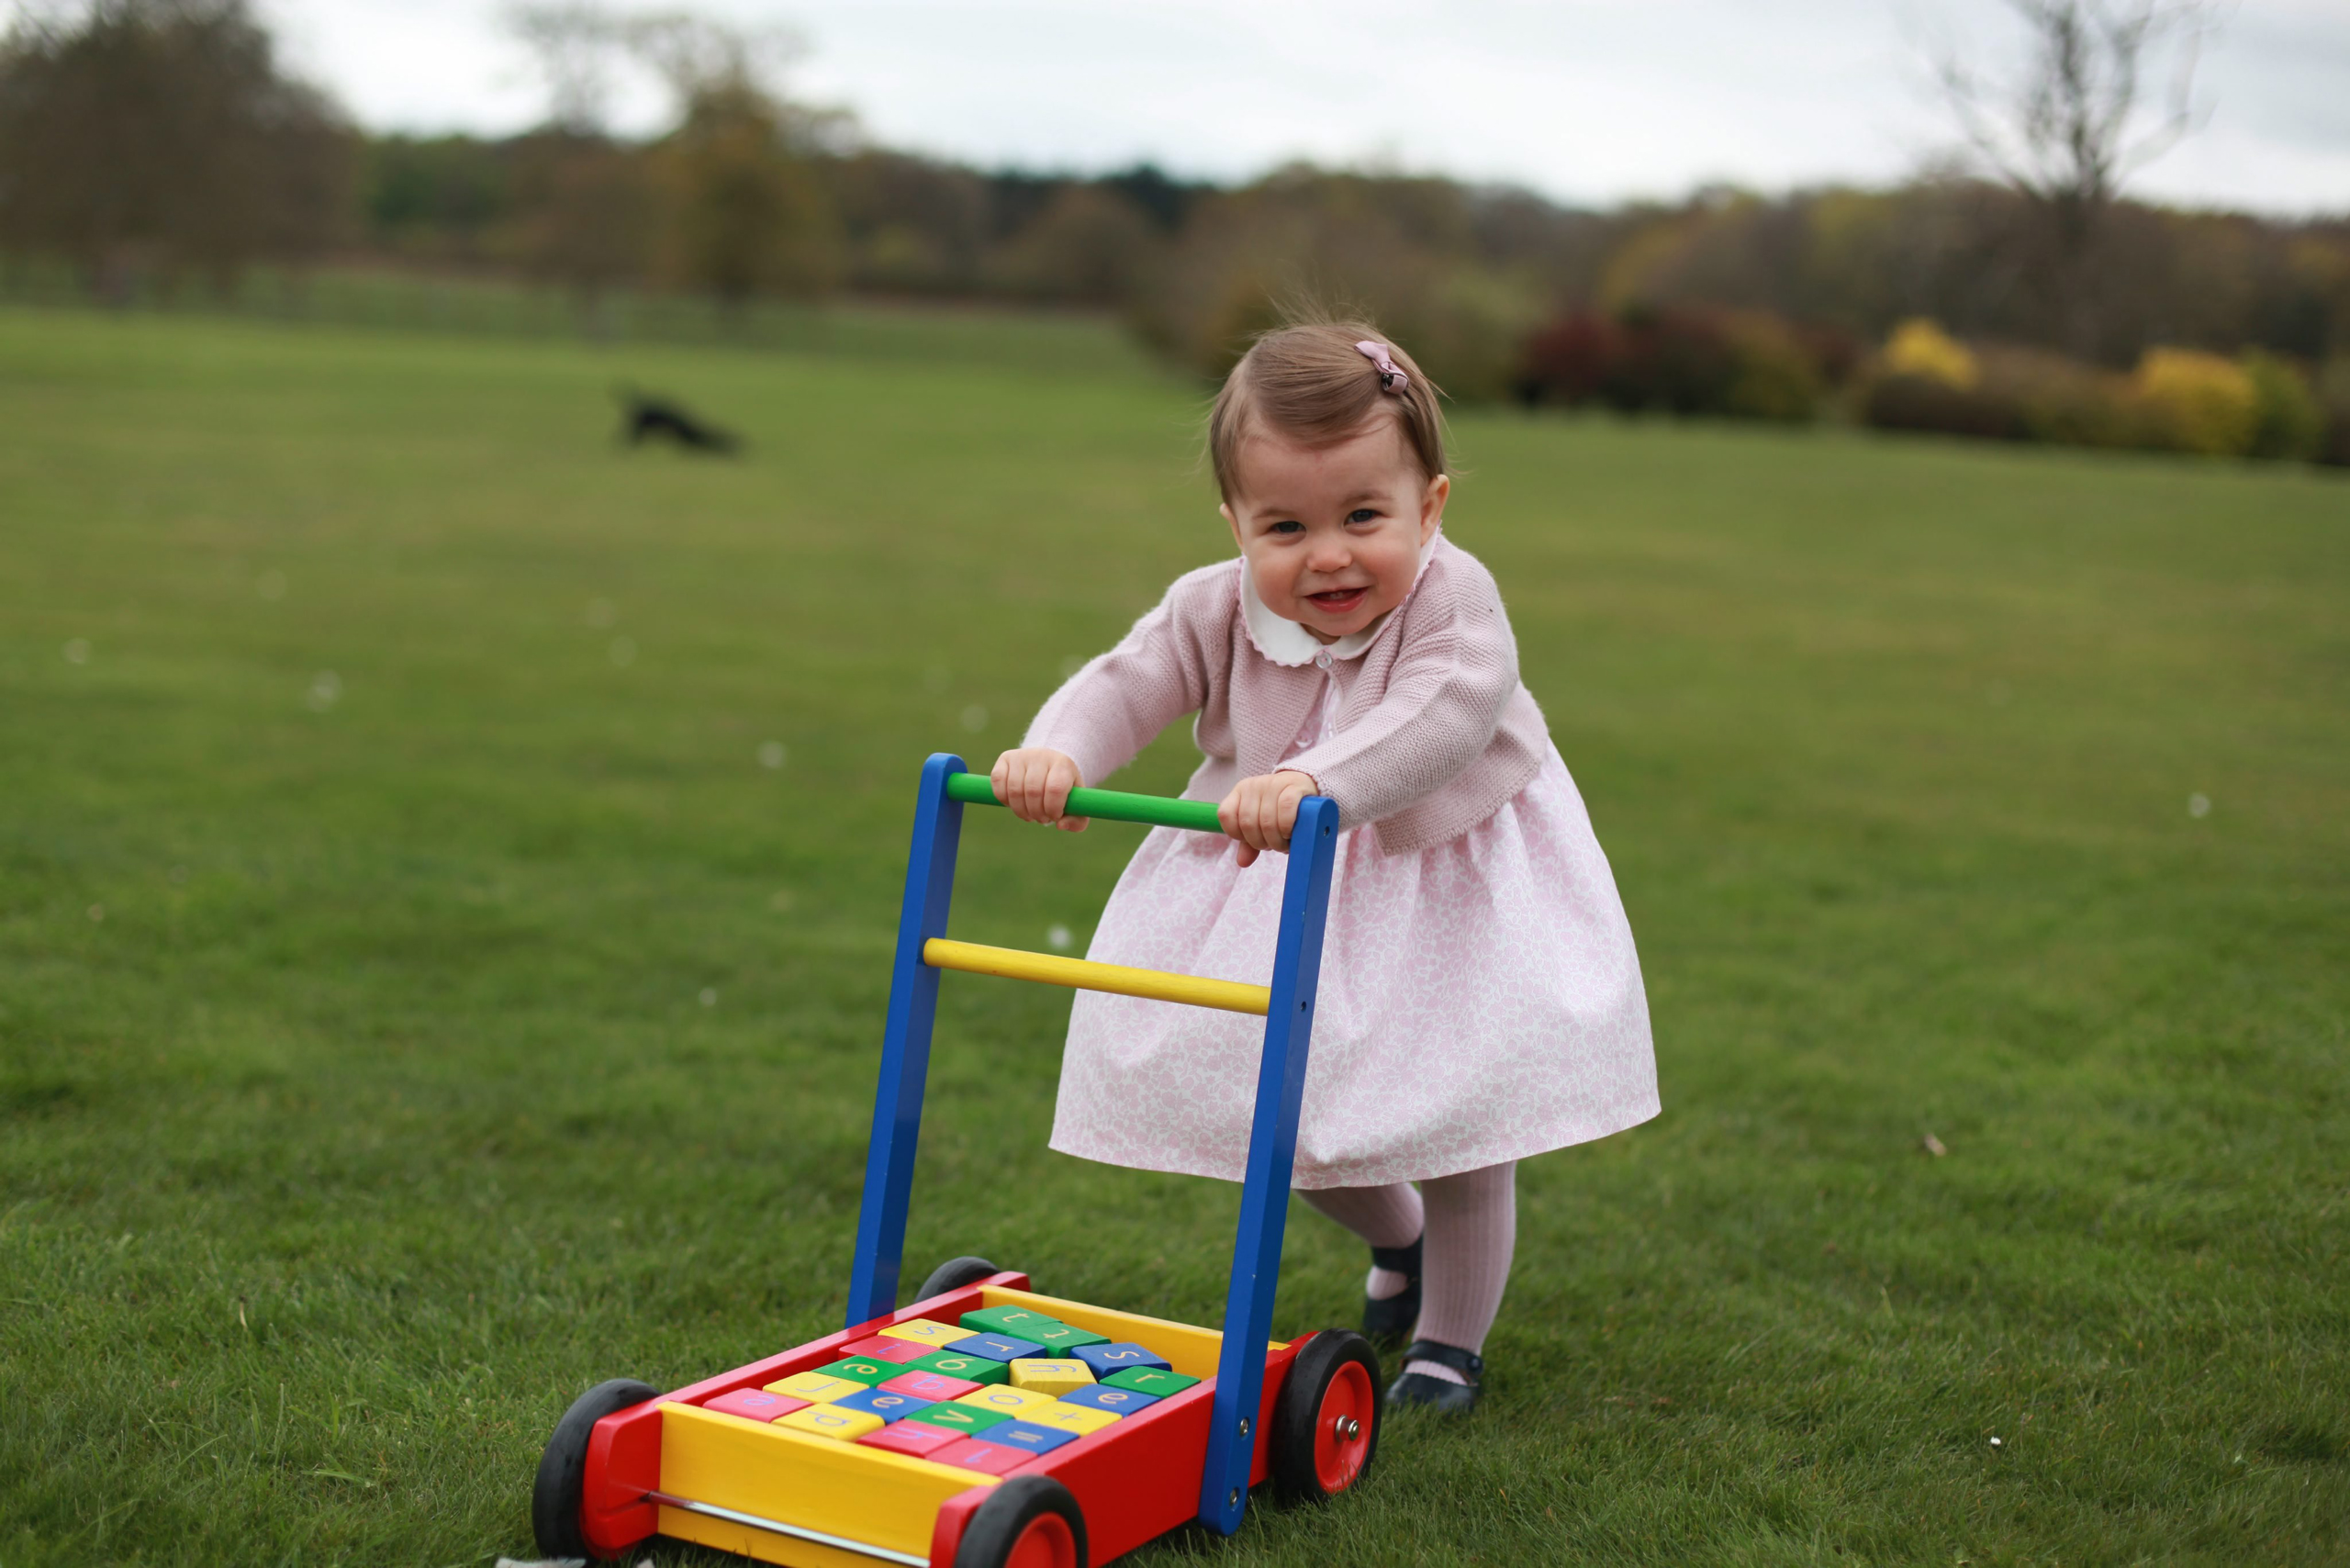 Princess Charlotte at the garden of Anmer Hall in Norfolk, U.K., in a photo made available by the Duke and Duchess of Cambridge on May 1, 2016. (Kensington Palace—EPA)